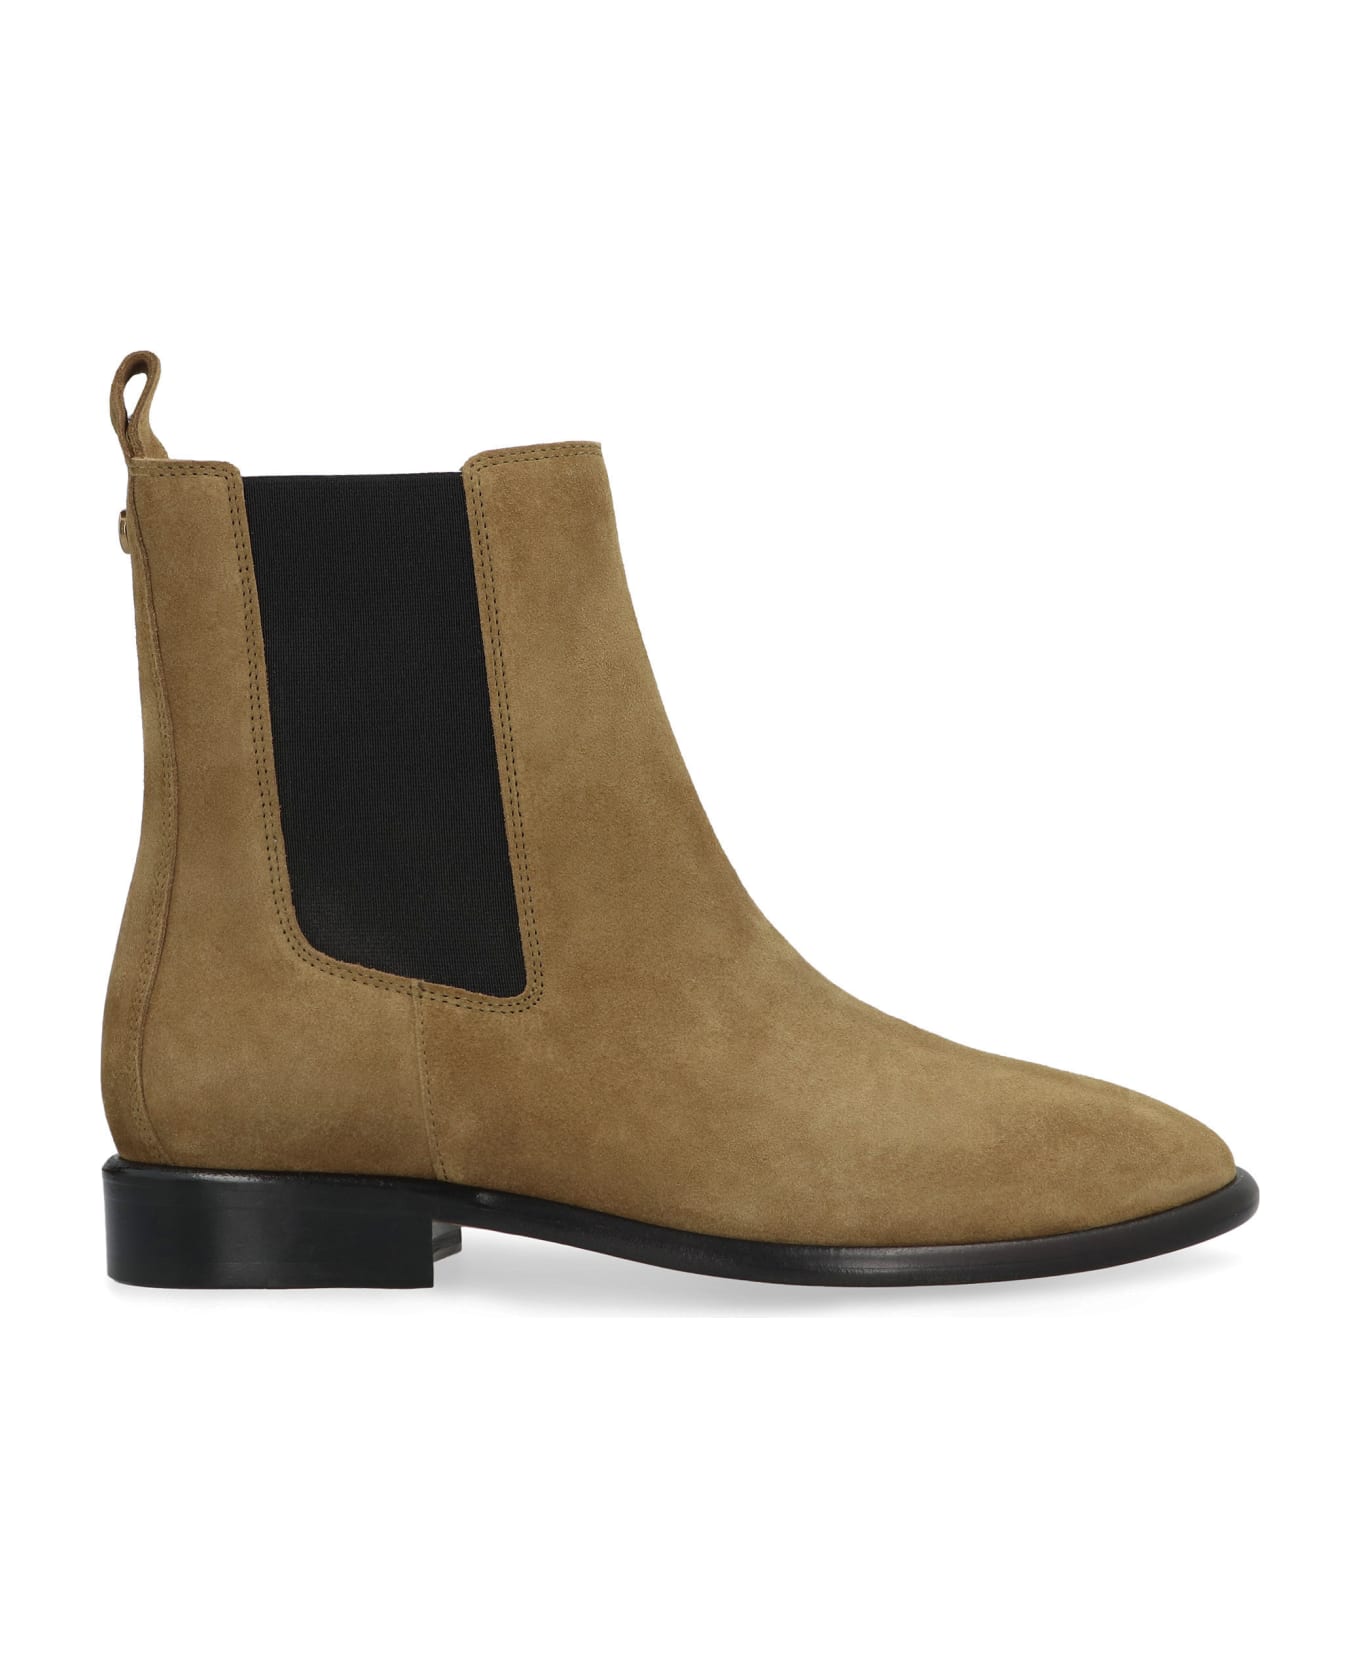 Isabel Marant Galna Suede Chelsea Boots - taupe